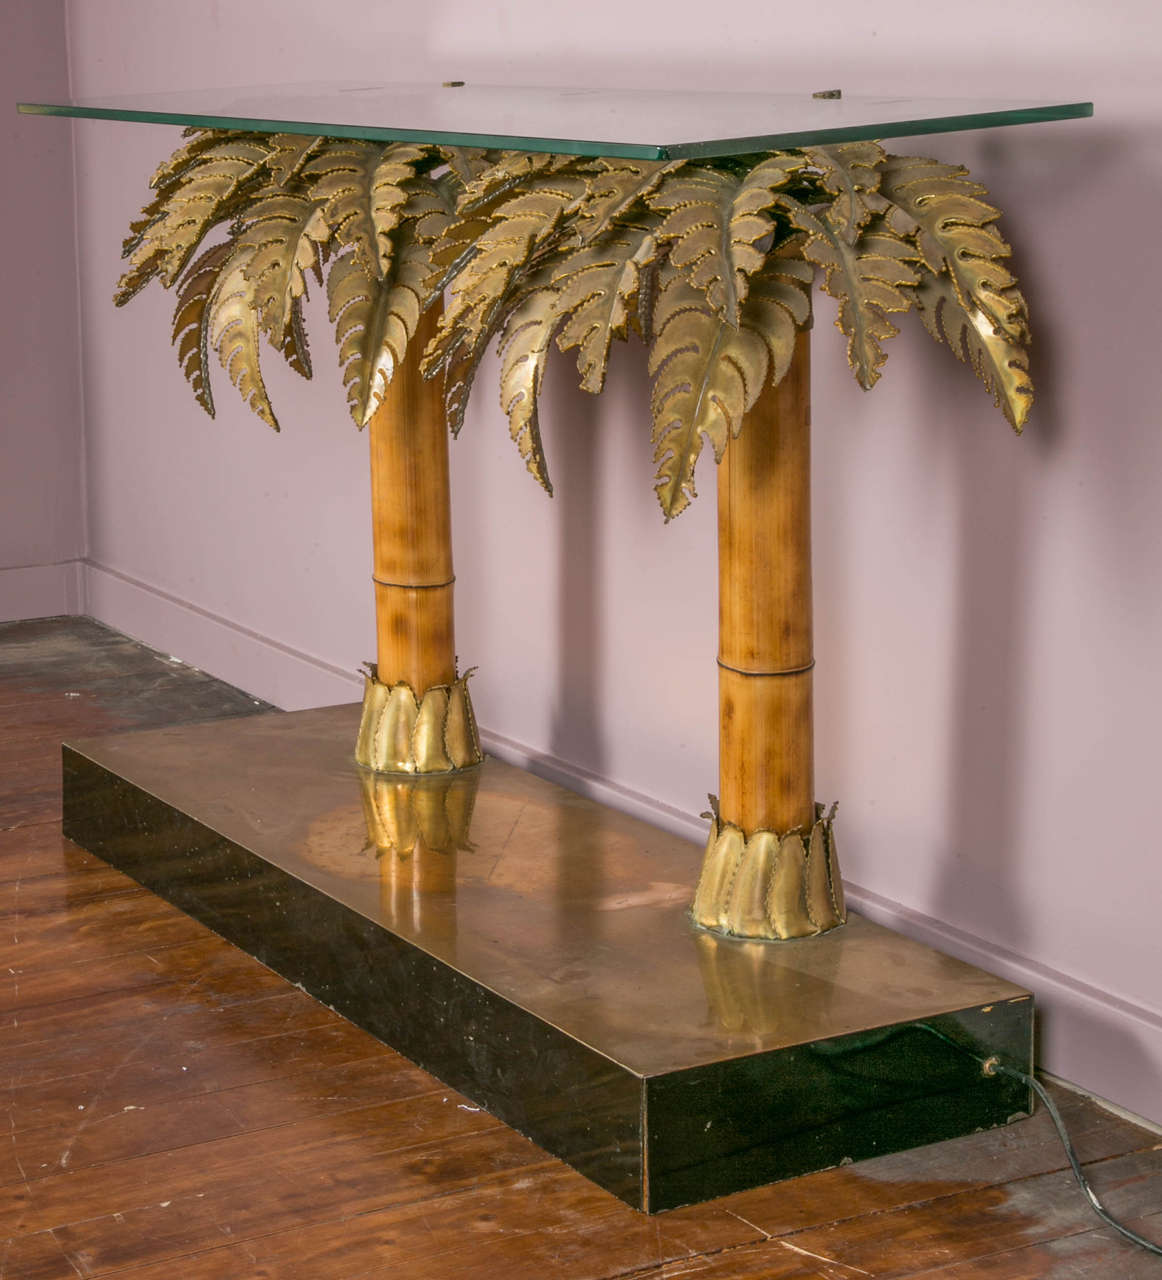 palm table